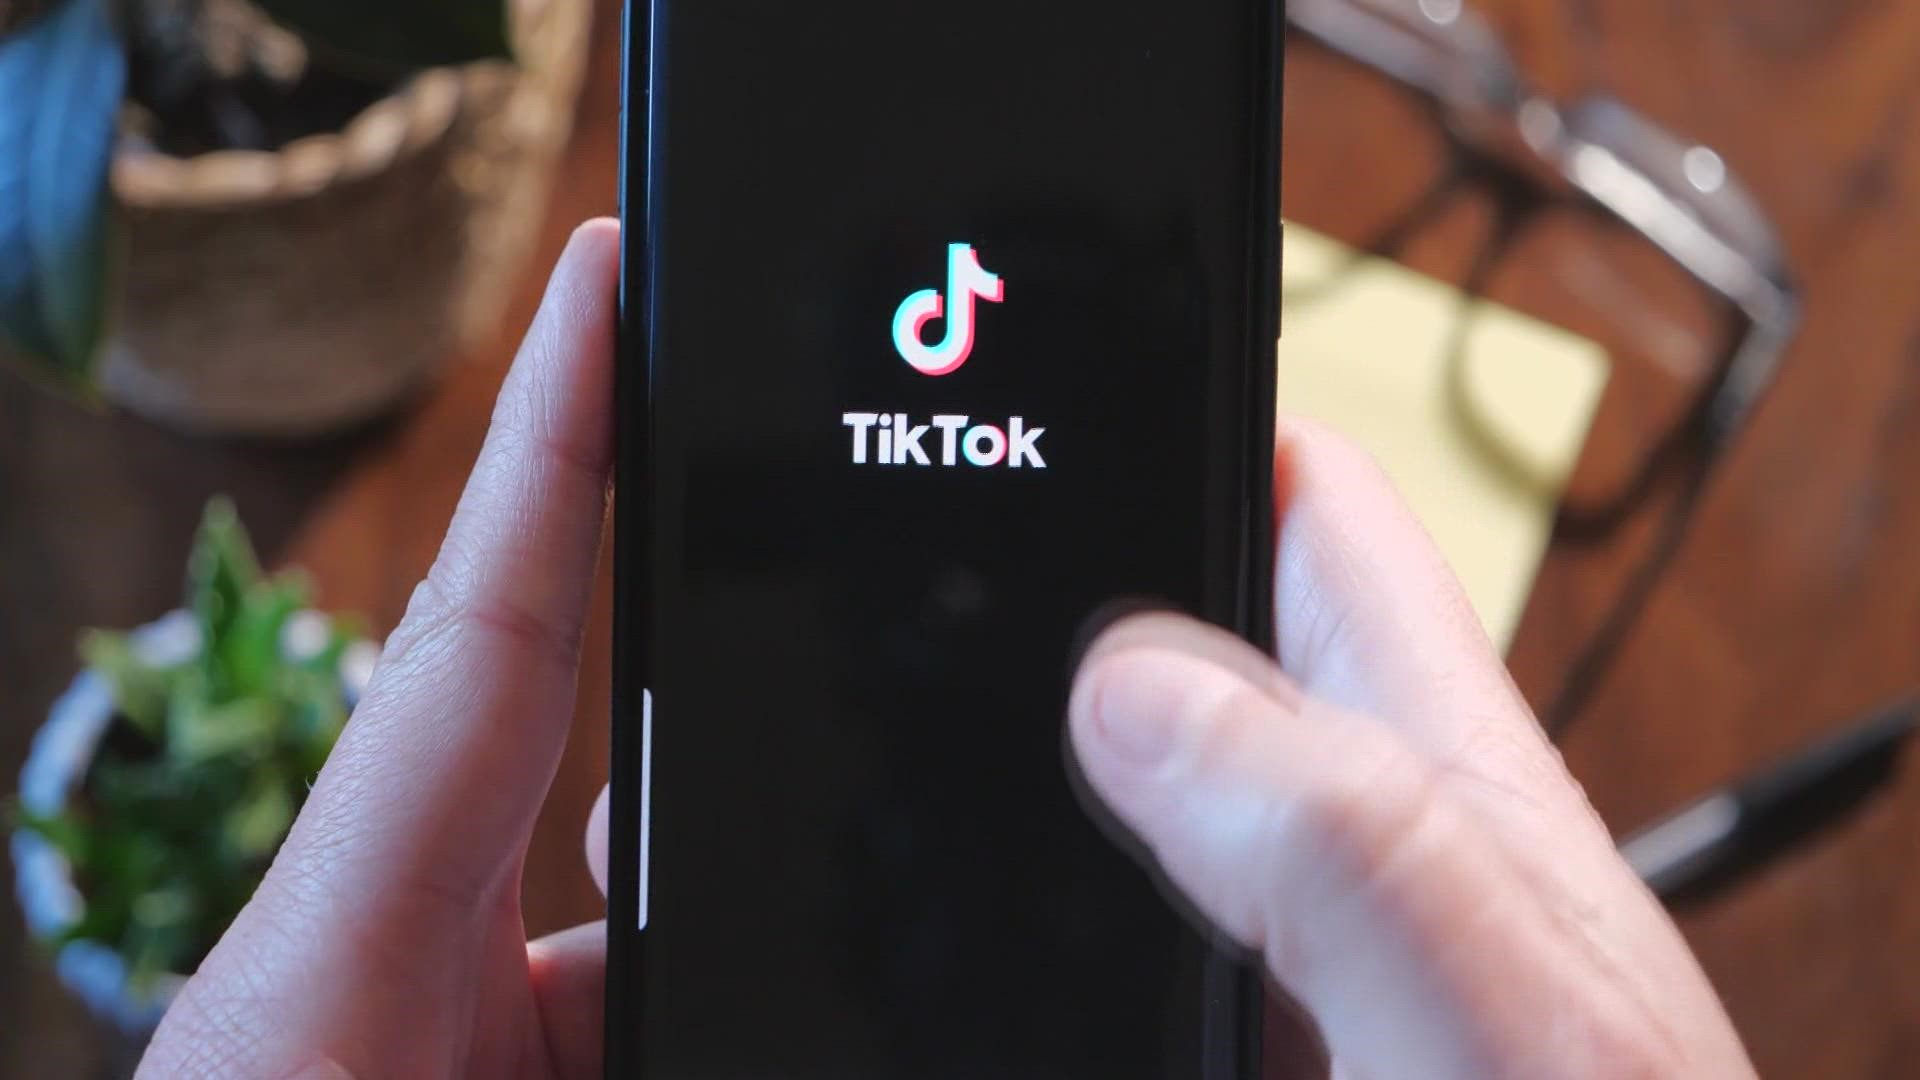 If you click a link in the Tik Tok app, you may be exposing your private information. Felix Krause published this new research information recently about Tik Tok.